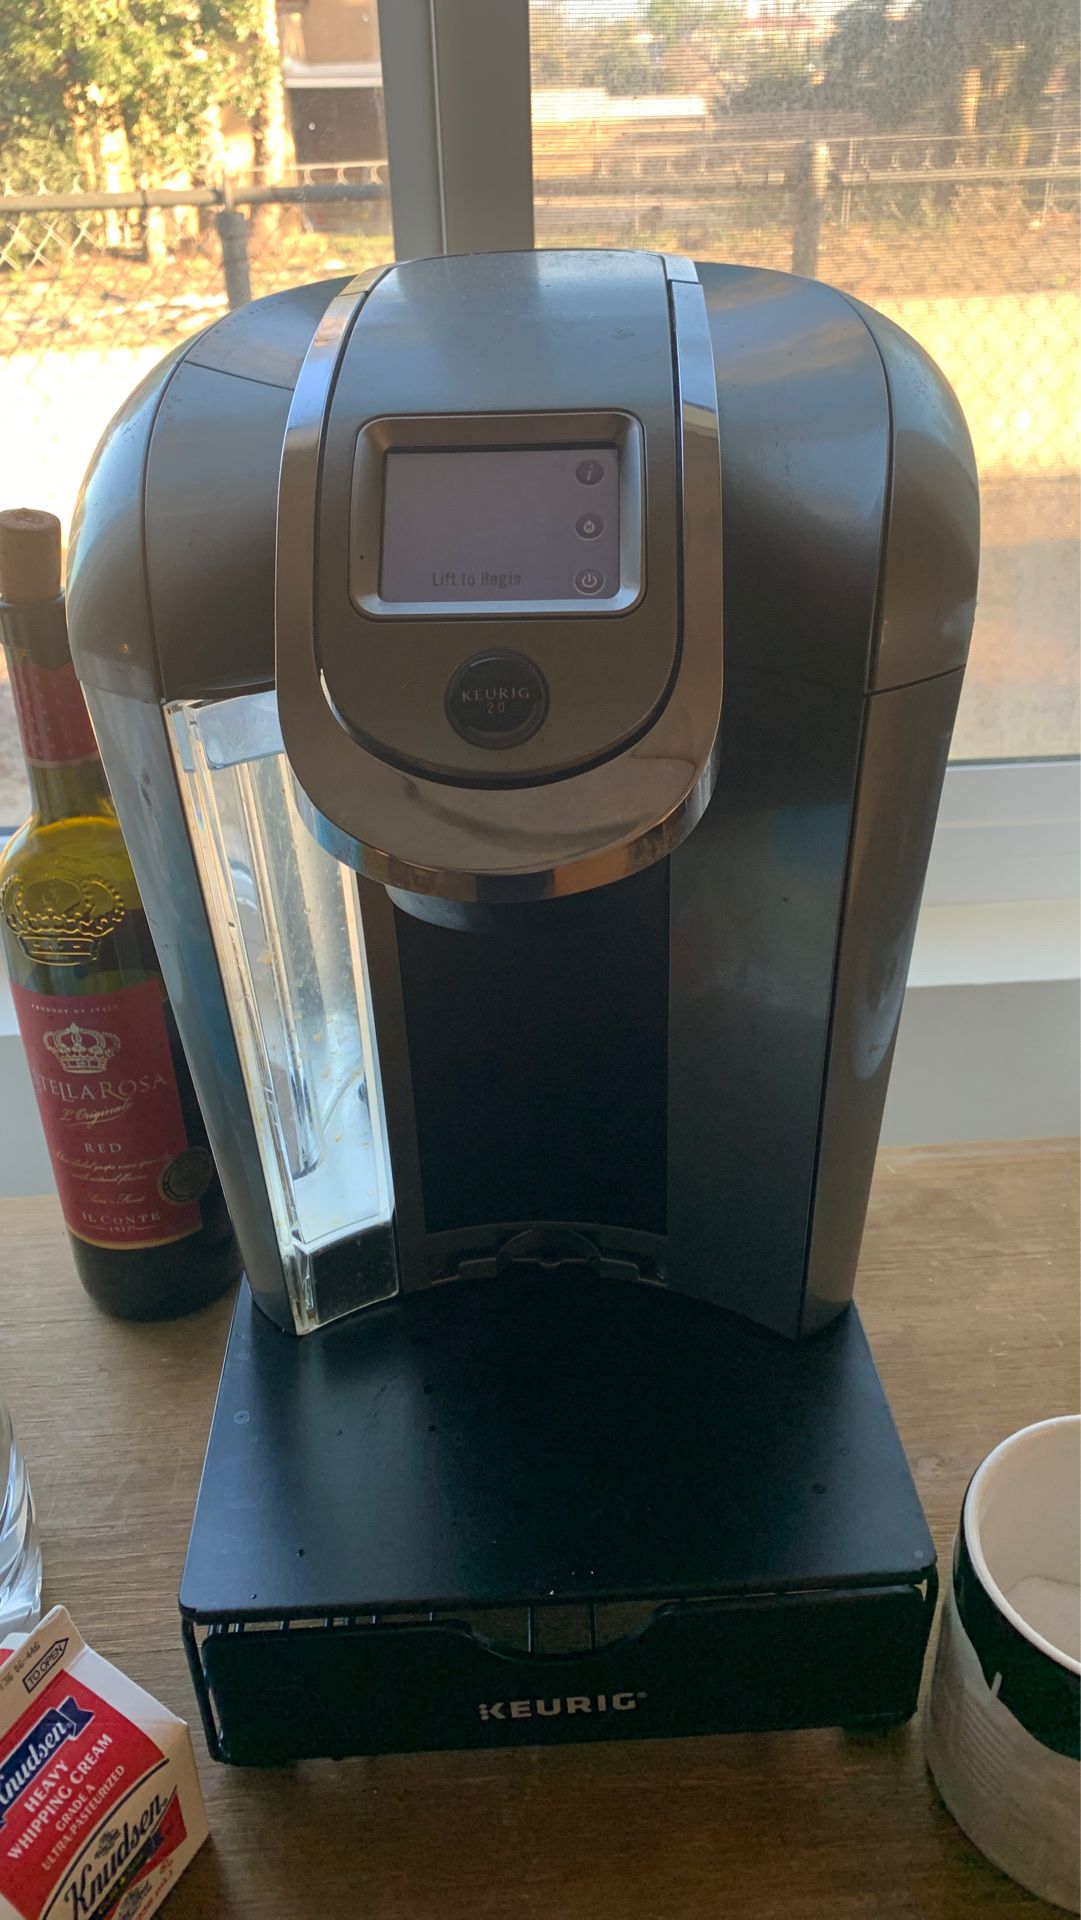 Keurig Great coffee machine after 12 cups of coffee